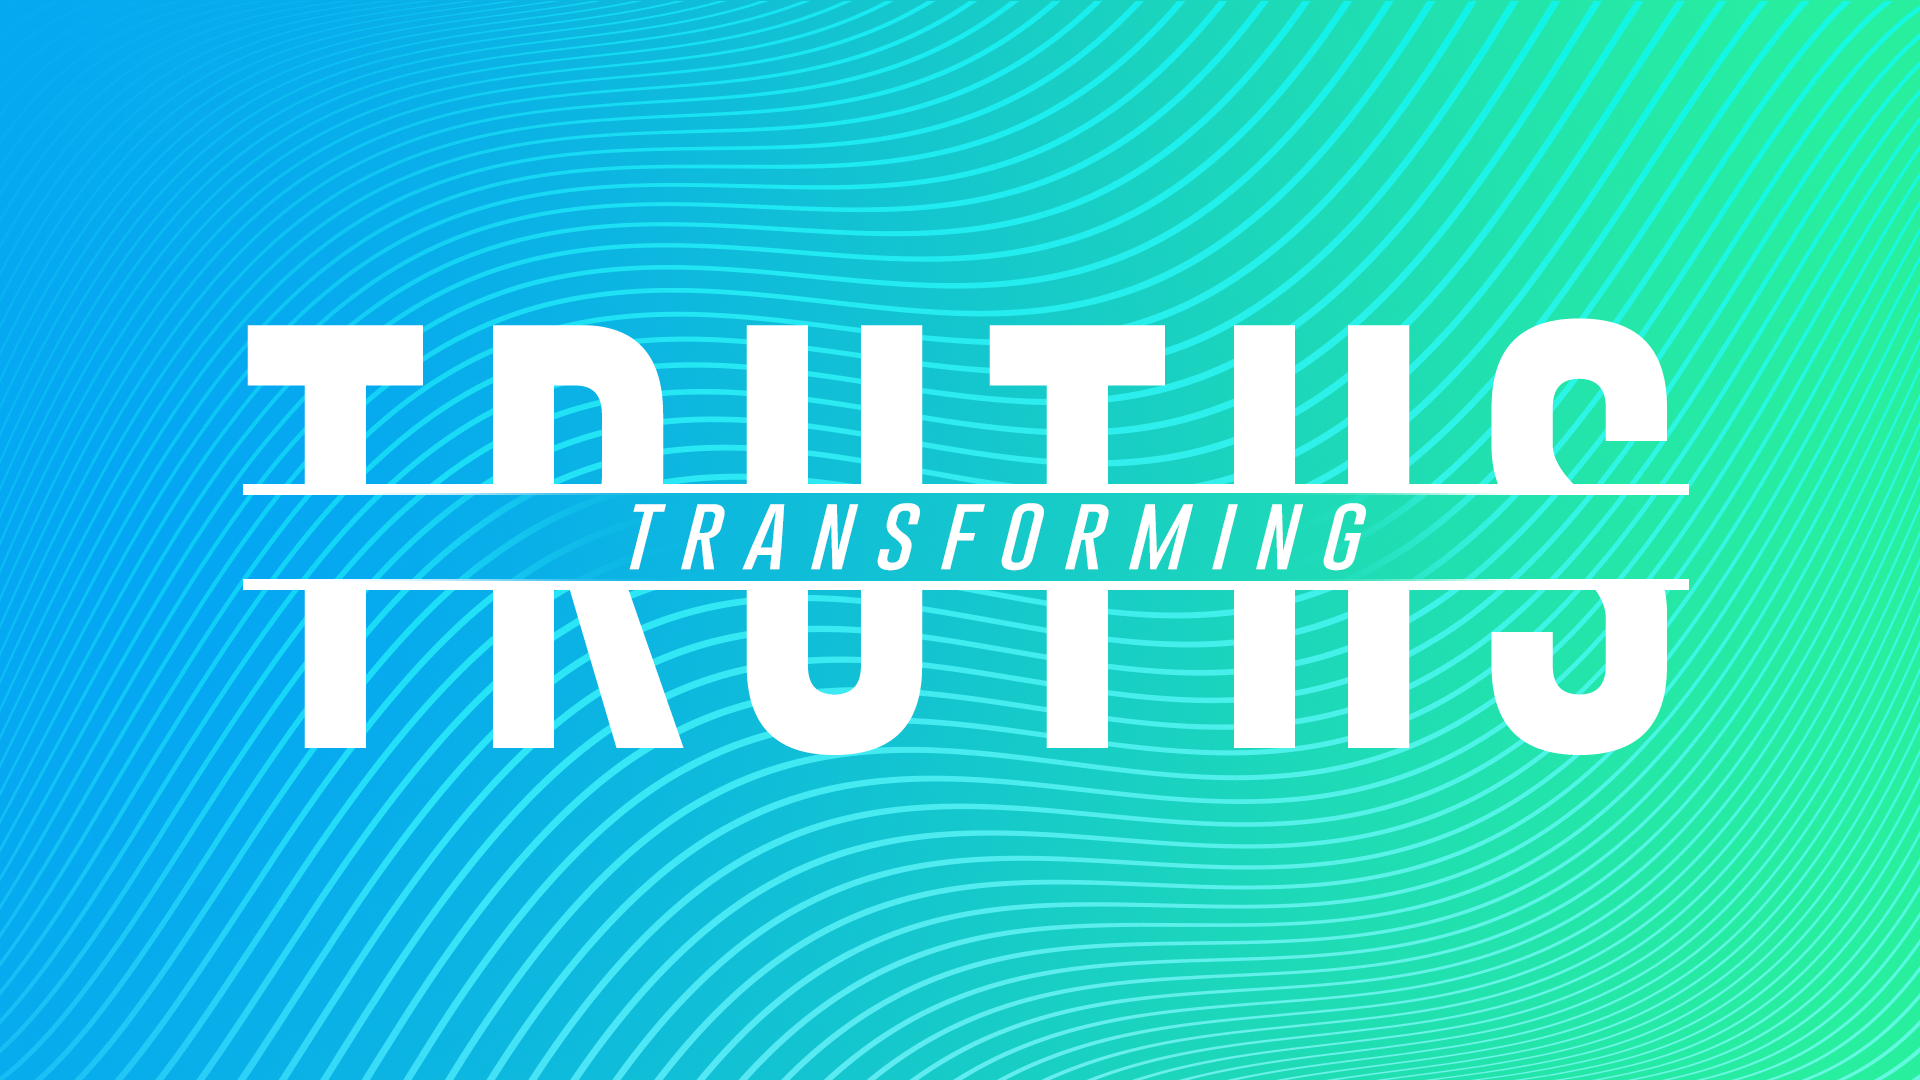 August 23, 2020 – Transforming Truths